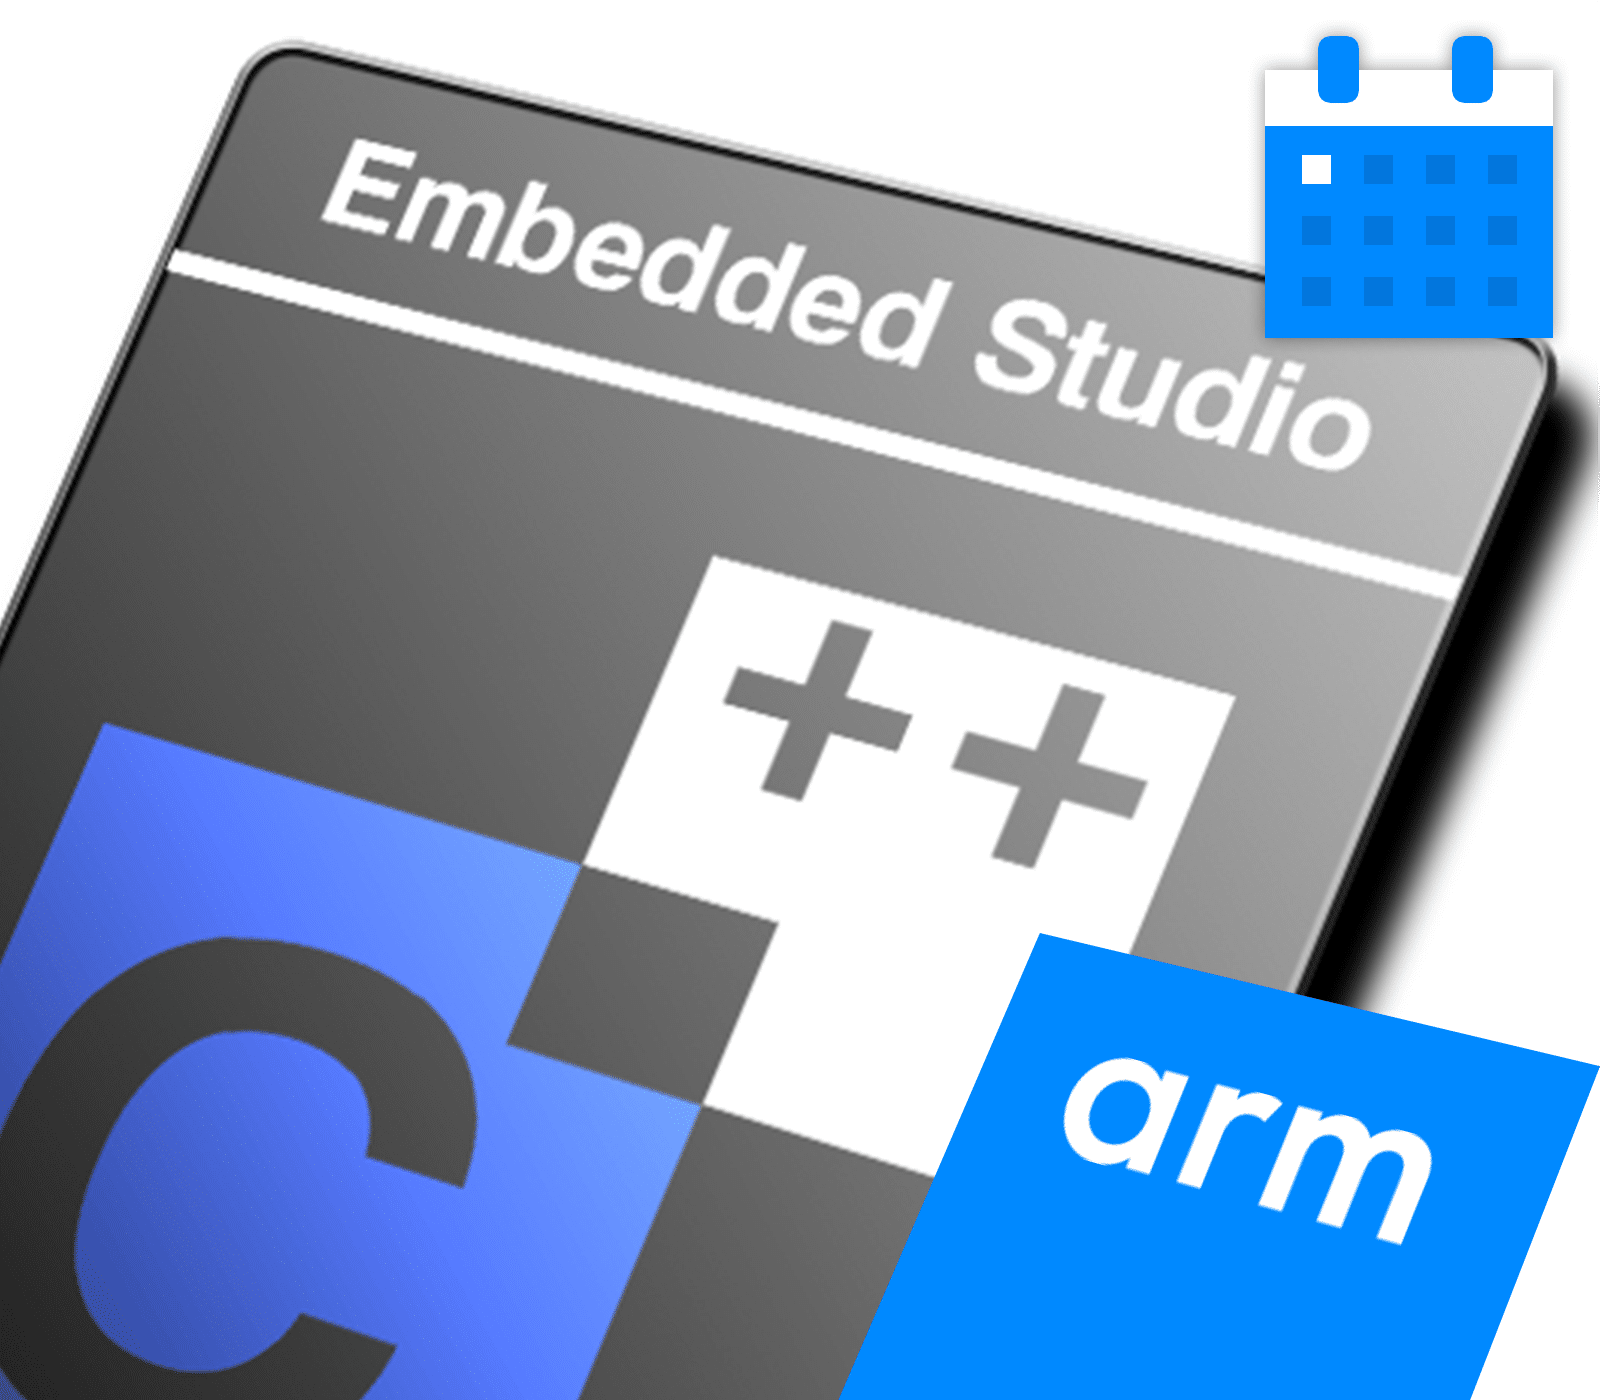 Embedded Studio Support and Update Extension